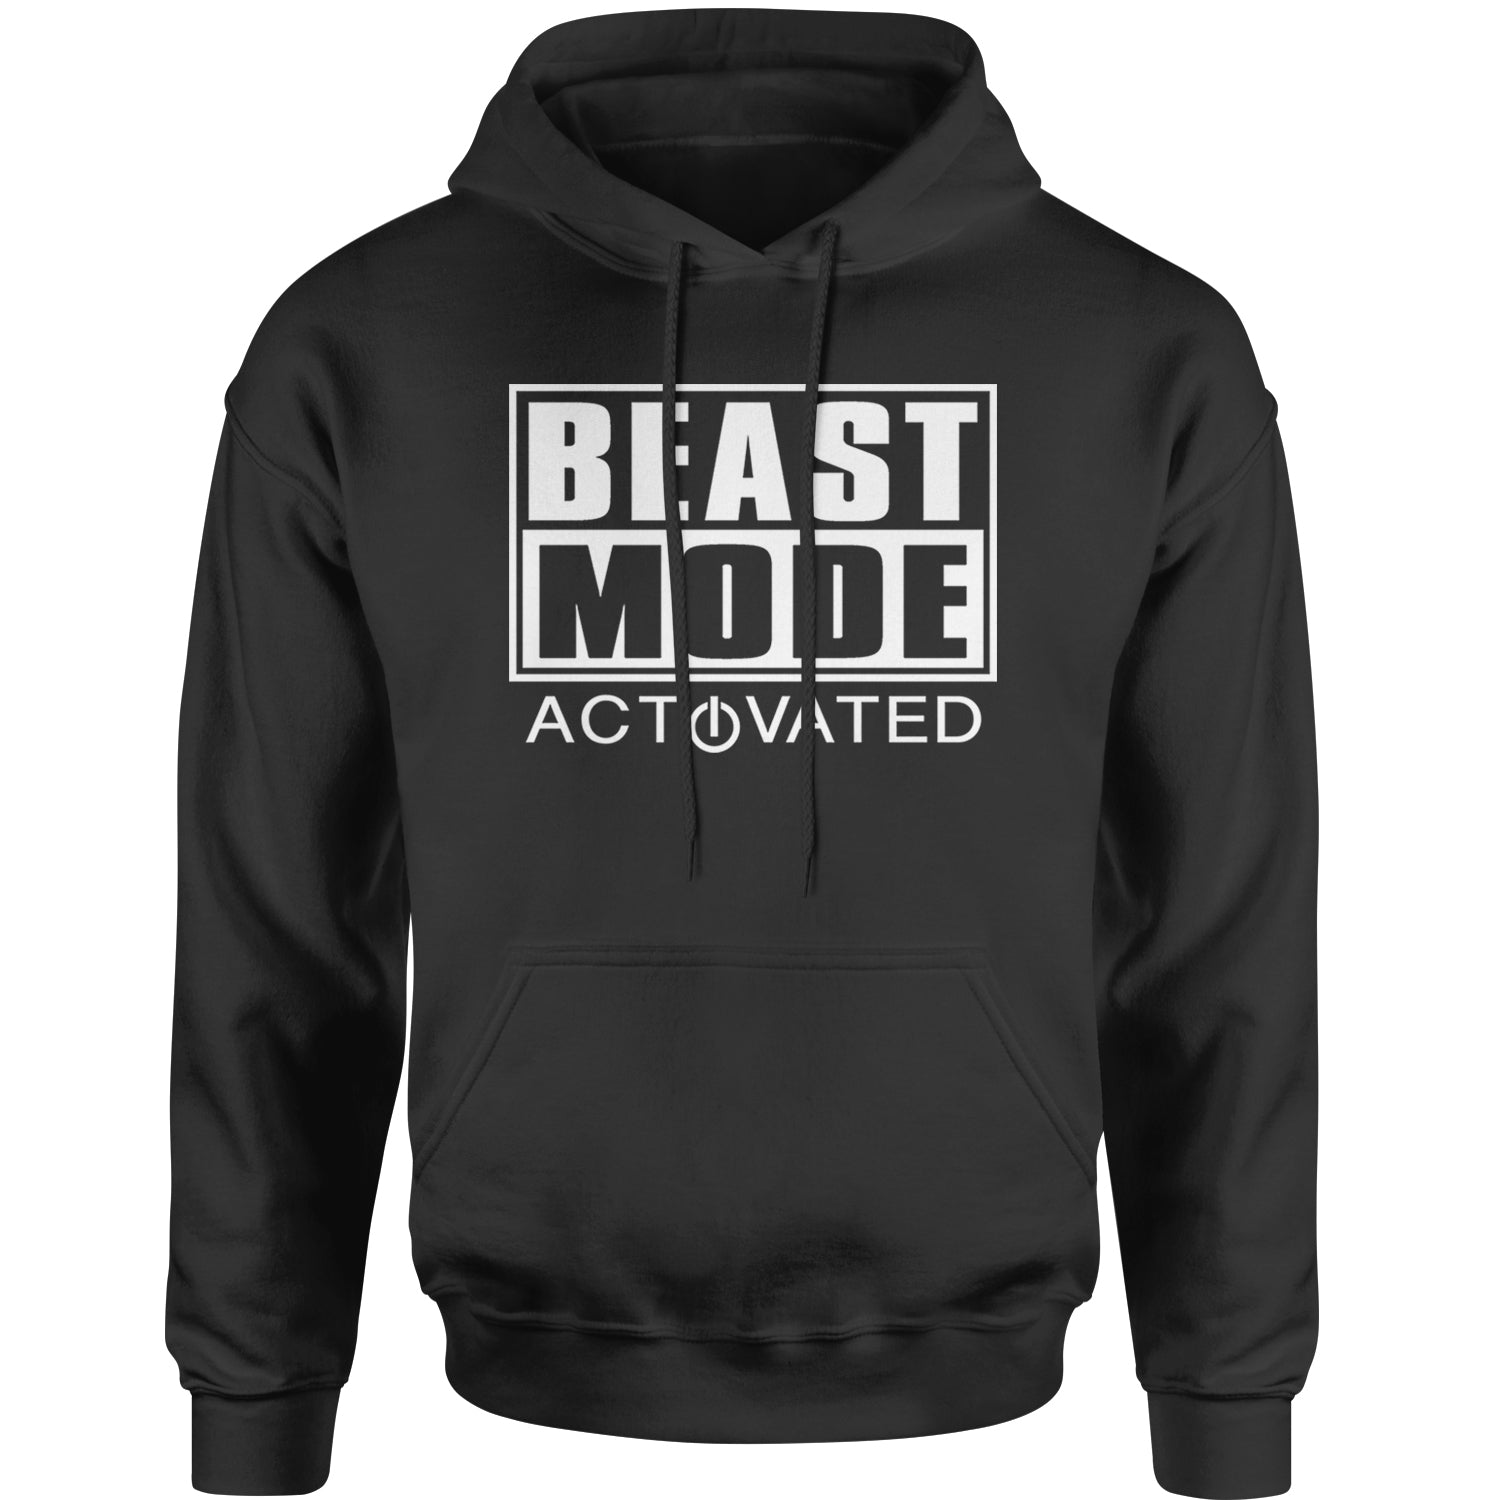 Activated Beast Mode Workout Gym Clothing Adult Hoodie Sweatshirt